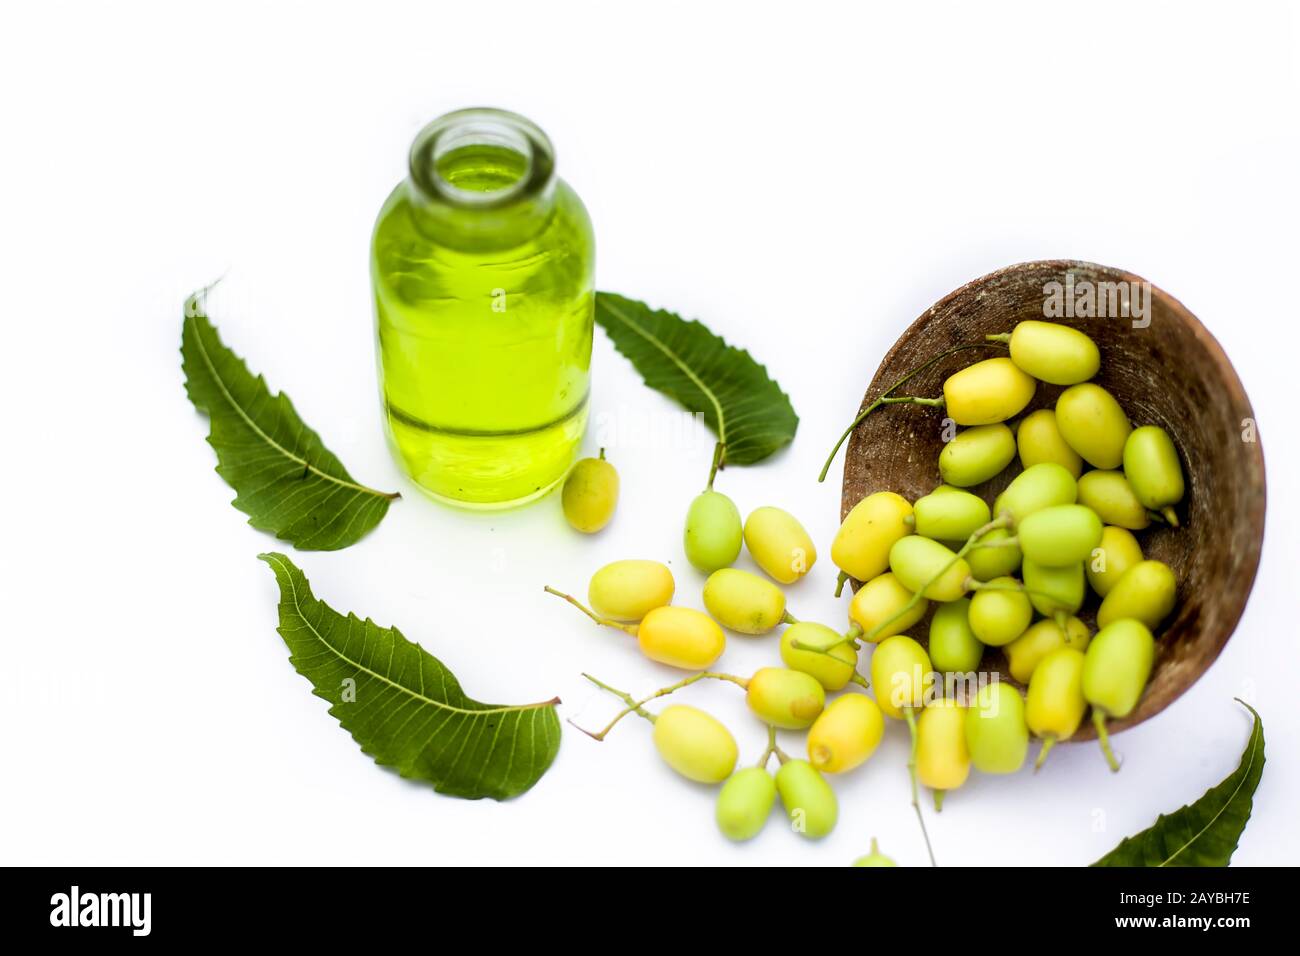 Fresh green neem fruit of Indian Lilac fruit in a clay bowl isolated on white along with its oil in a transparent glass bottle.Horizontal shot. Stock Photo